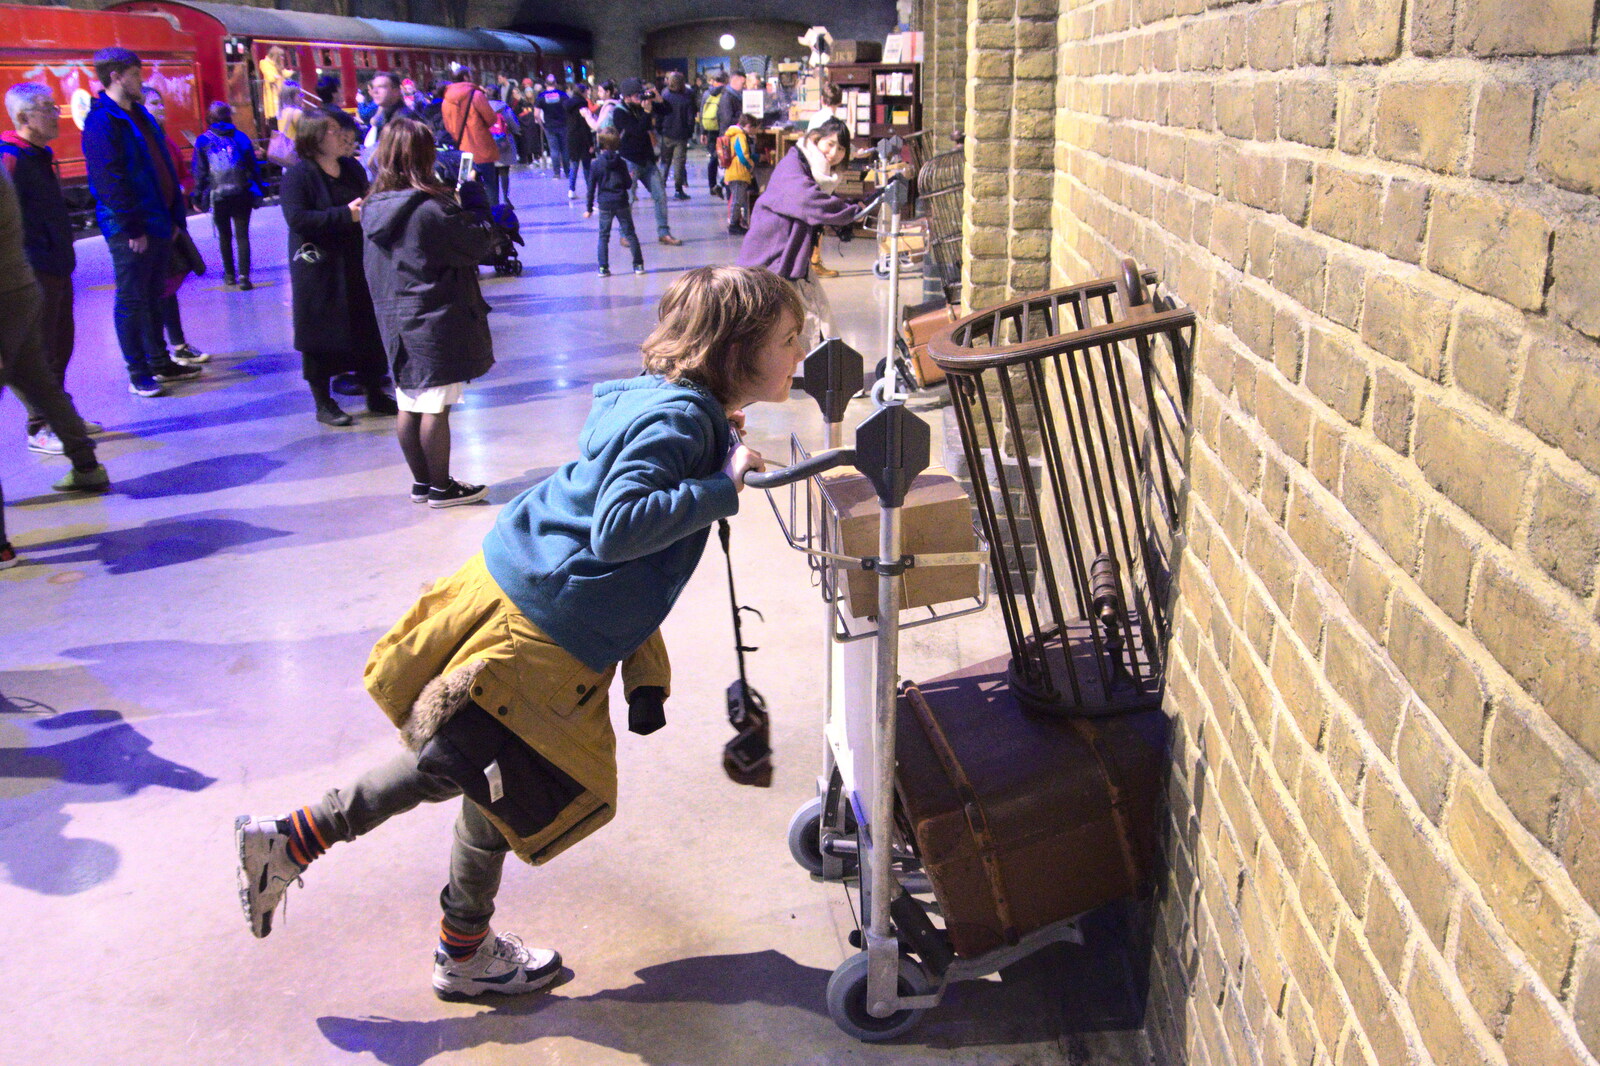 Fred pushes his trolley through the wall from A Trip to Harry Potter World, Leavesden, Hertfordshire - 16th February 2020